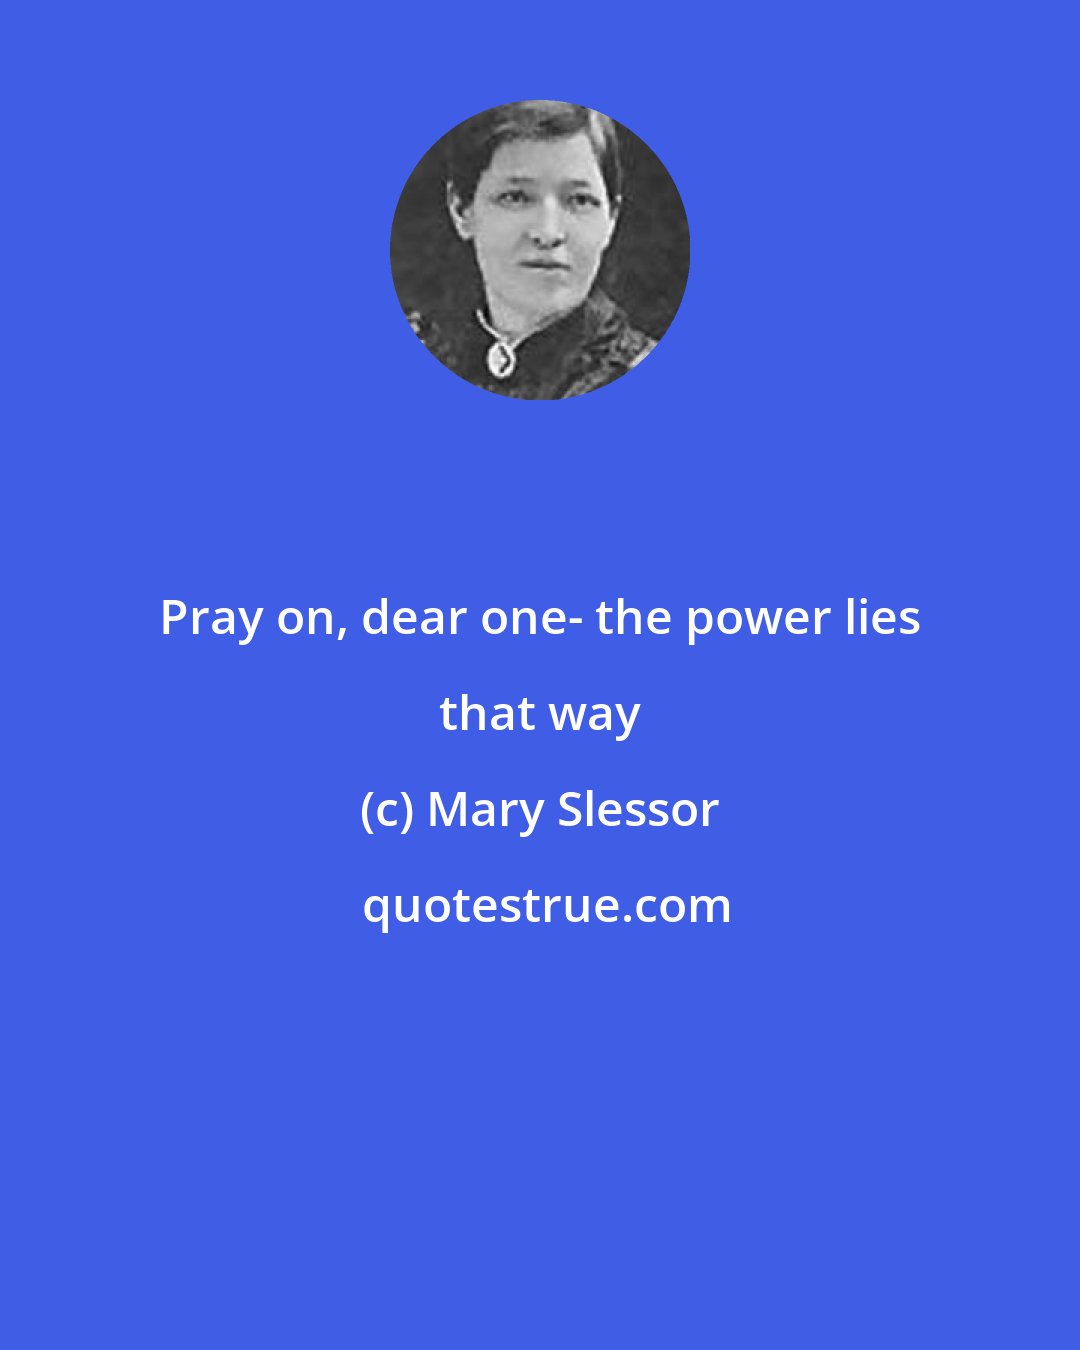 Mary Slessor: Pray on, dear one- the power lies that way